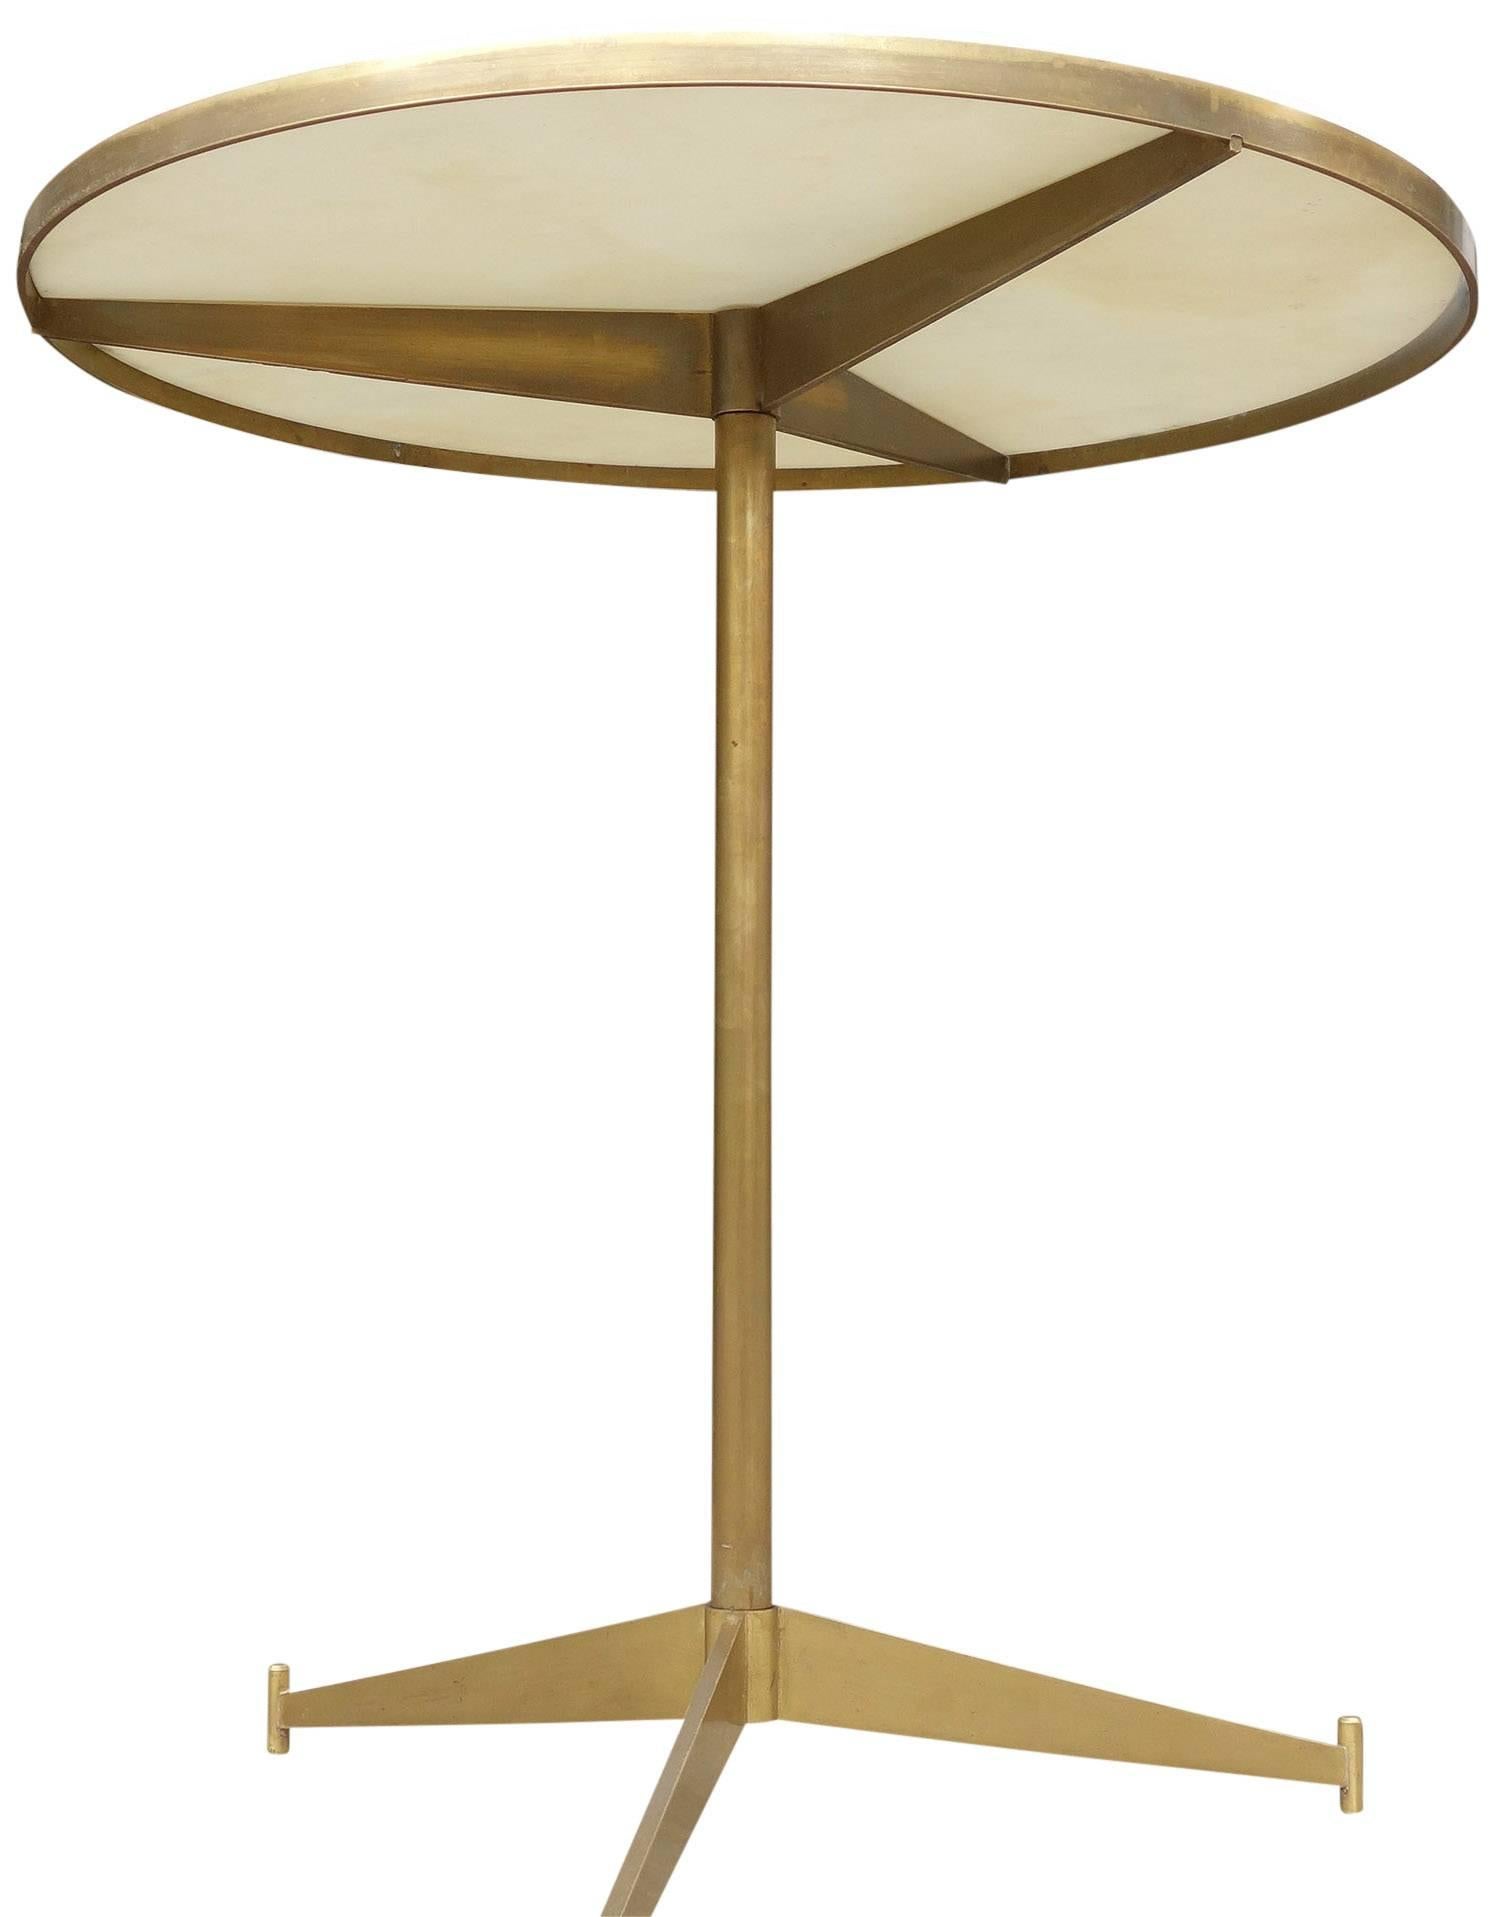 Exceptional Paul McCobb side table for Directional. (Also known as the cigarette table) This is perhaps his rarest design. Simple and elegant lines with a solid brass frame on an opaque white glass top. 
Model 1094. 1956.
 